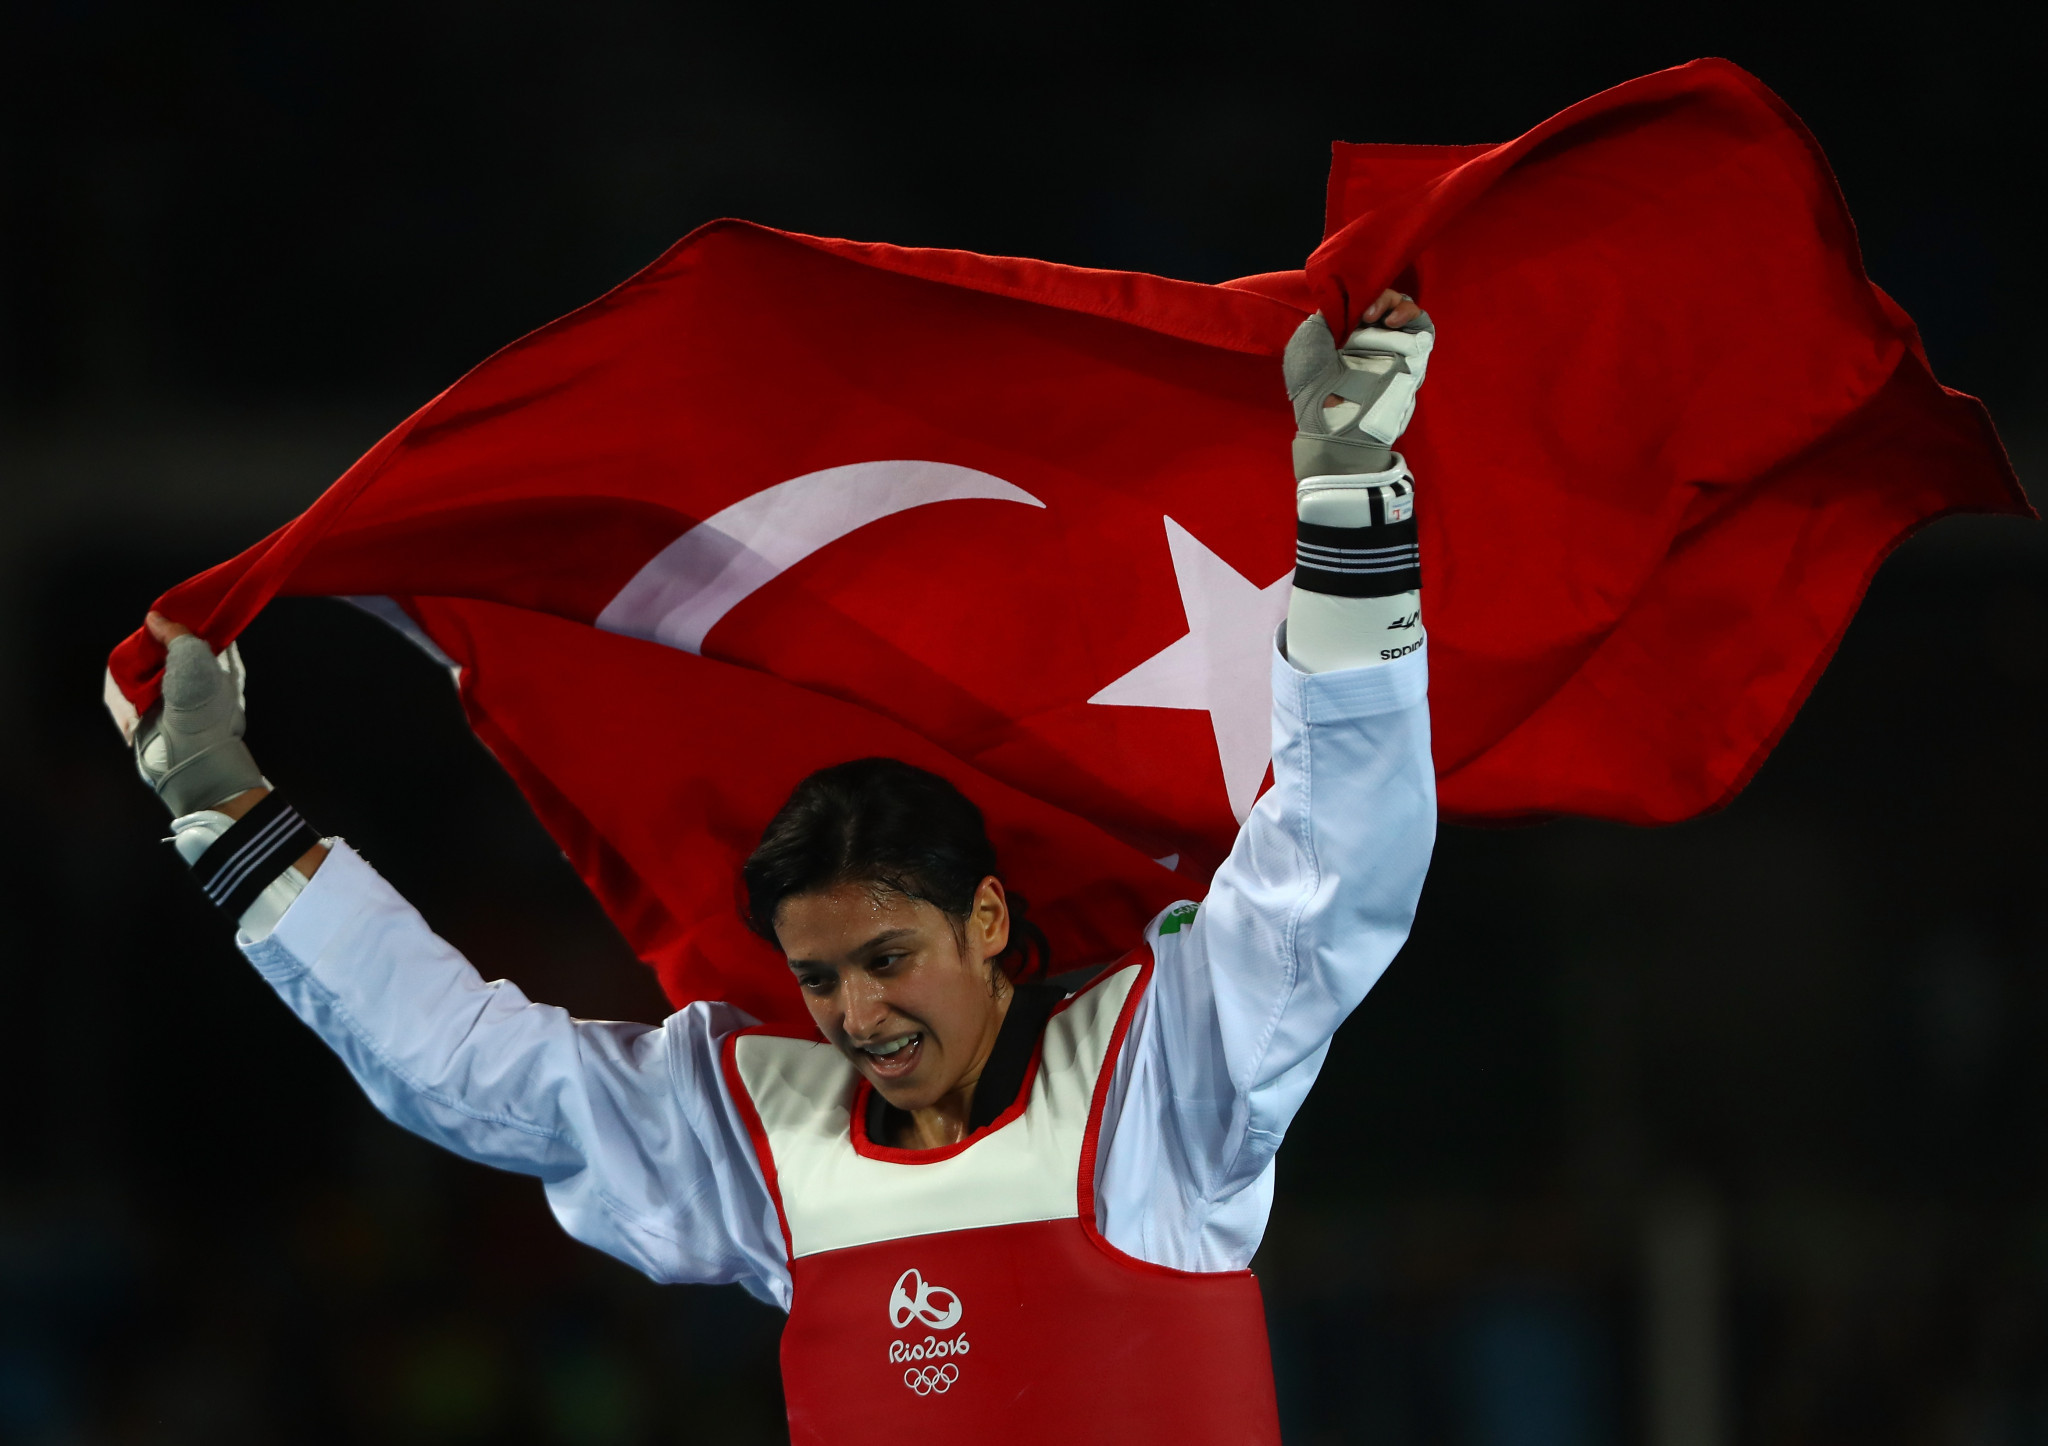 Action at the Turkish Open Taekwondo Tournament is scheduled to take place across the senior, junior and cadet categories in Istanbul ©Getty Images